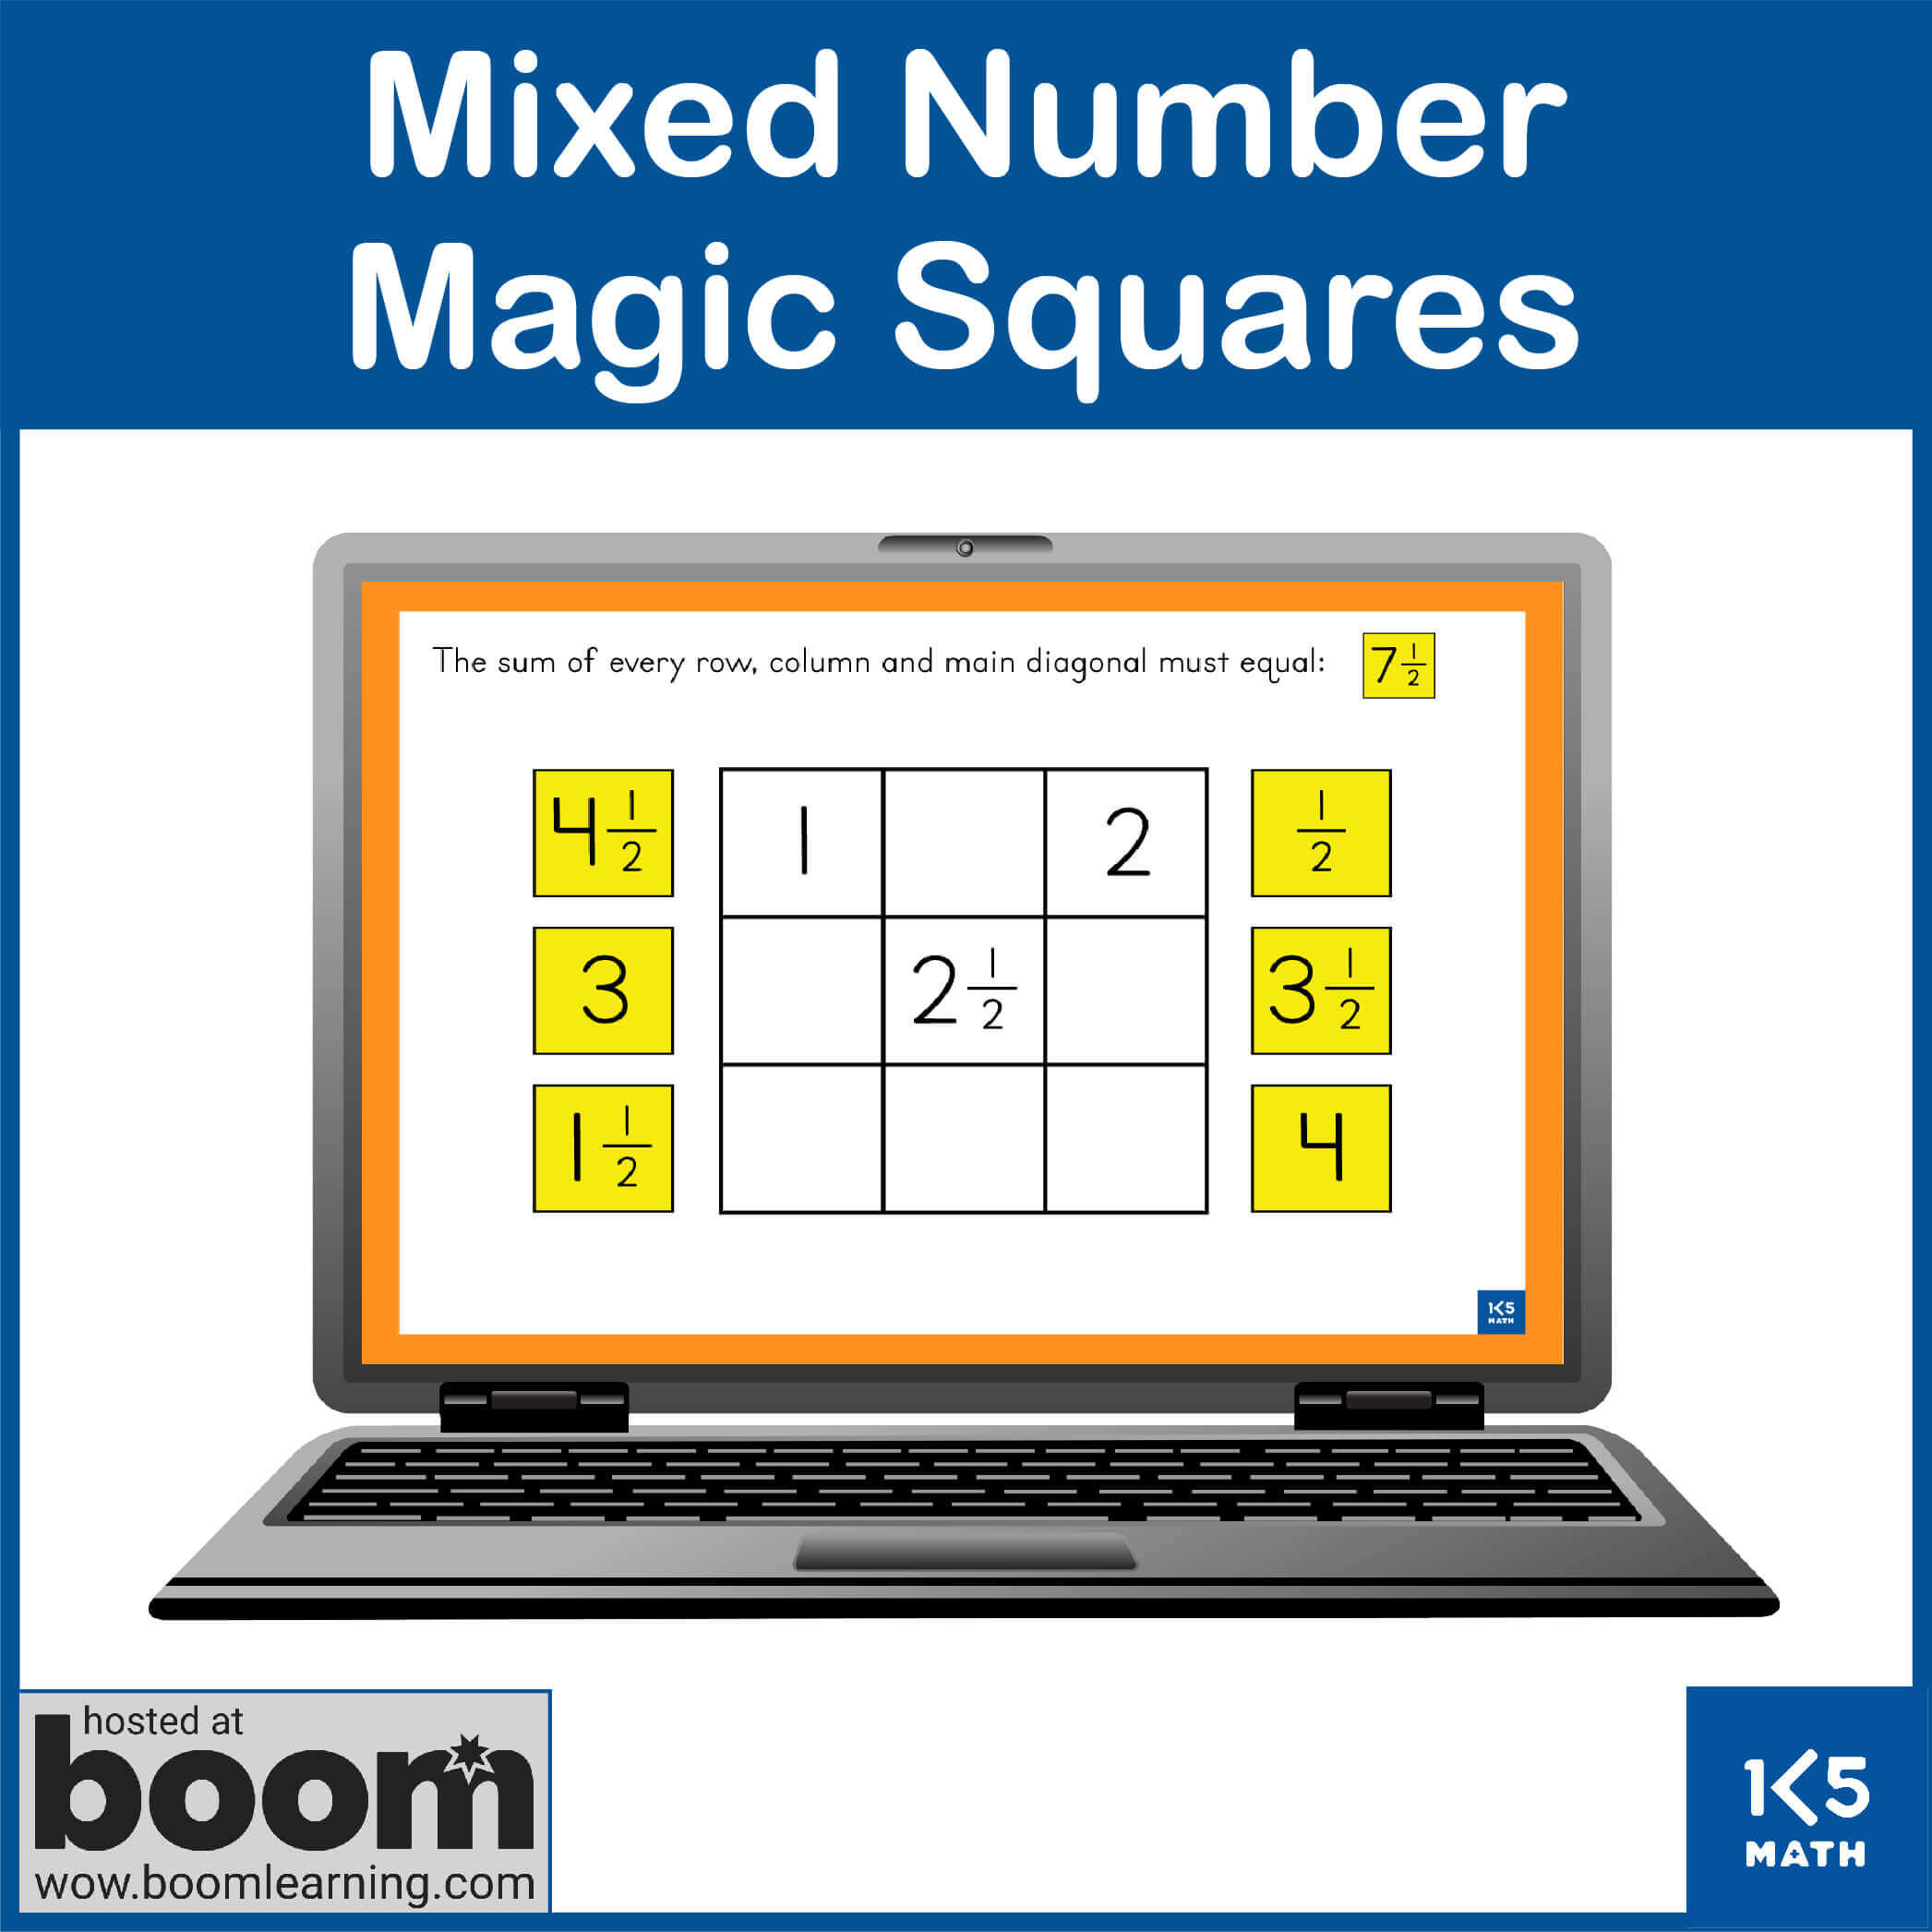 Boom Cards: Mixed Number Magic Squares